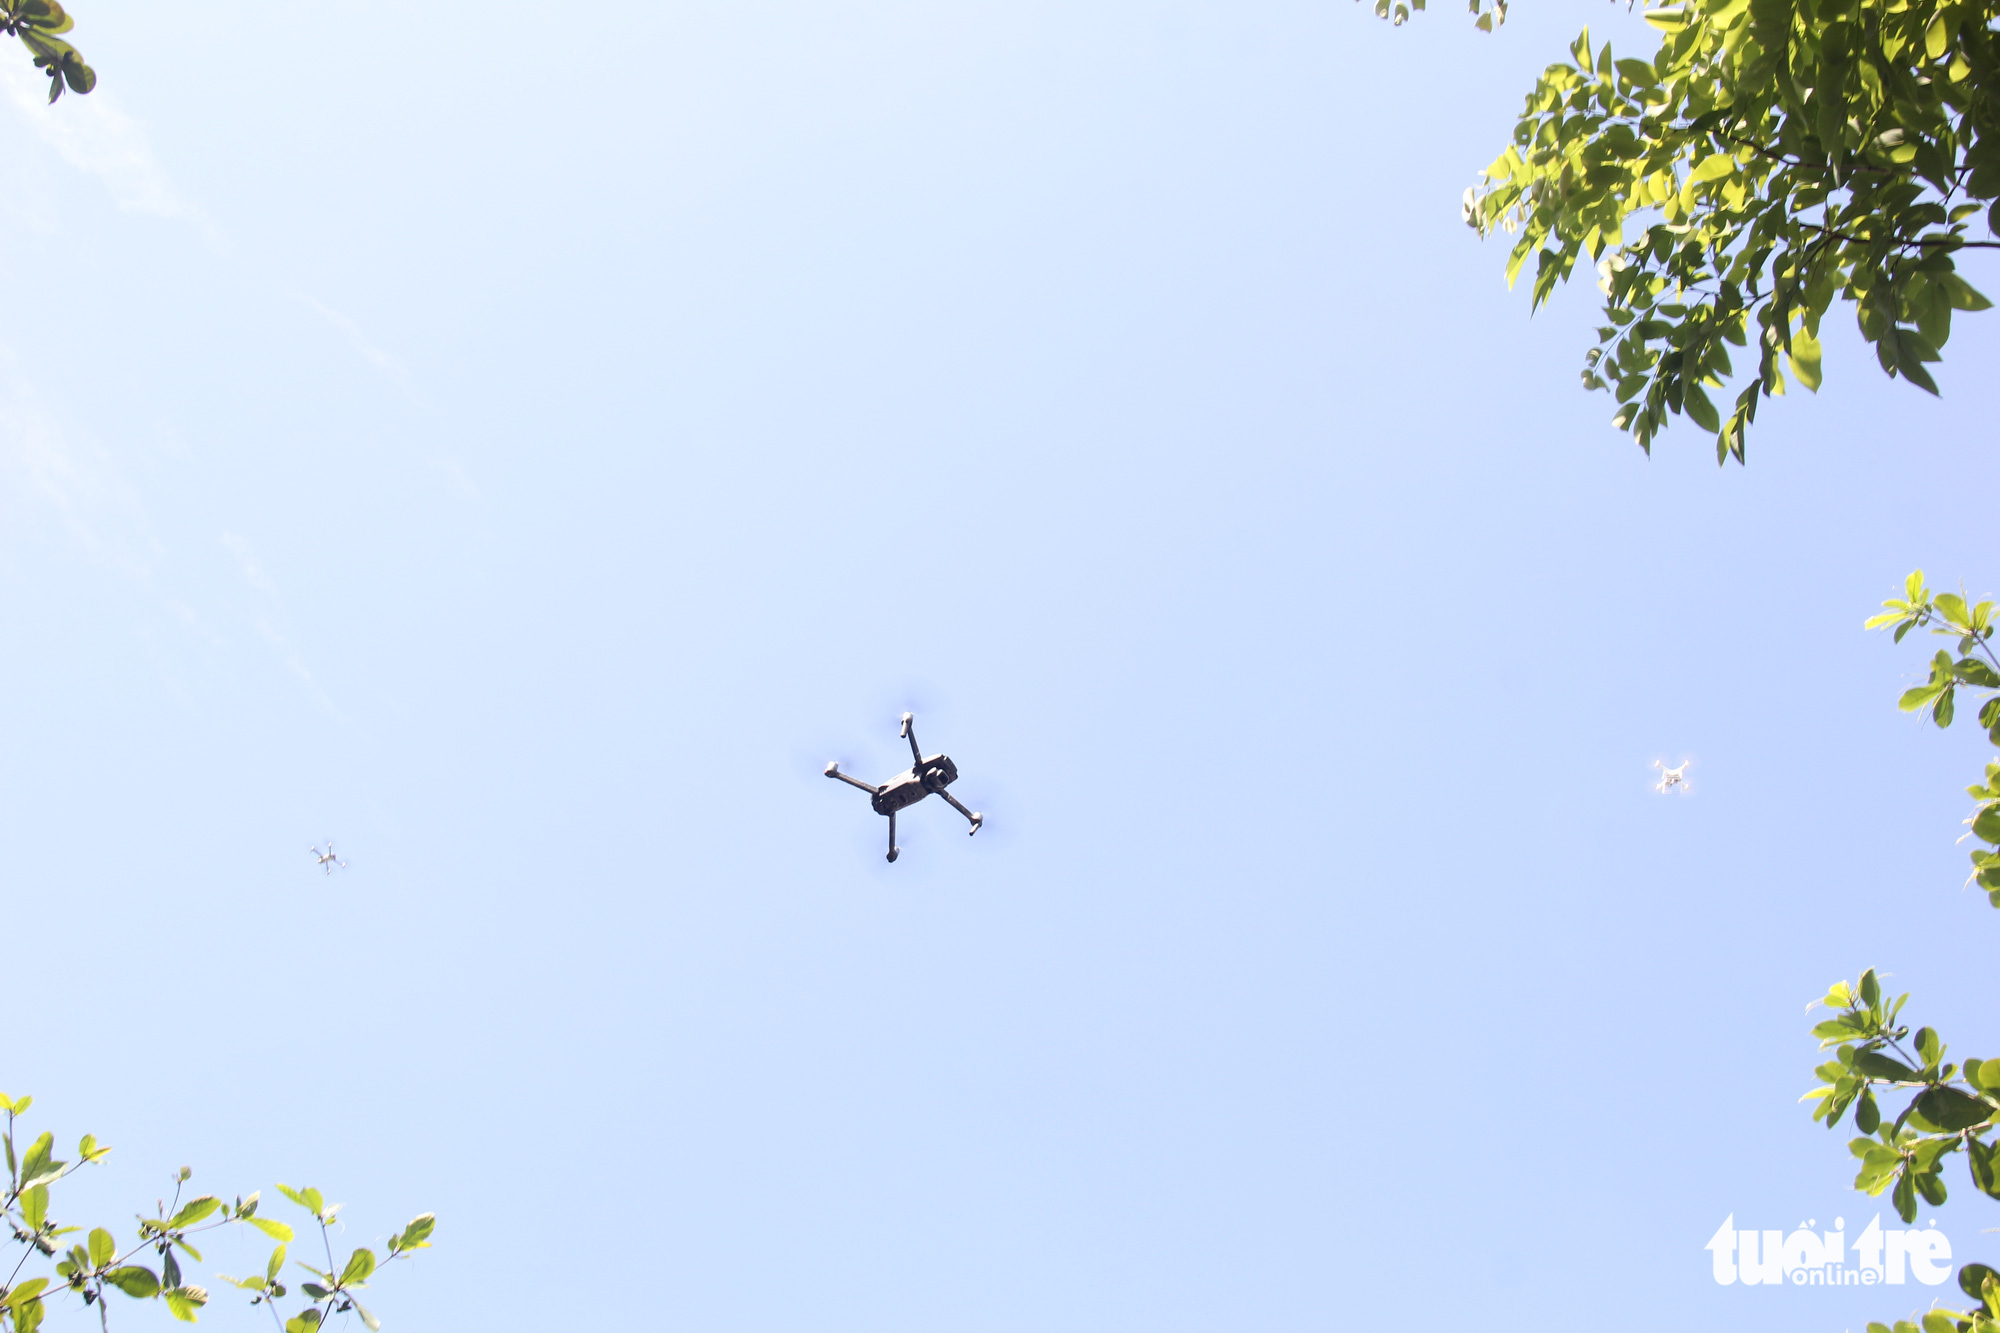 Da Nang district begins trial use of drones to monitor residents during COVID-19 pandemic